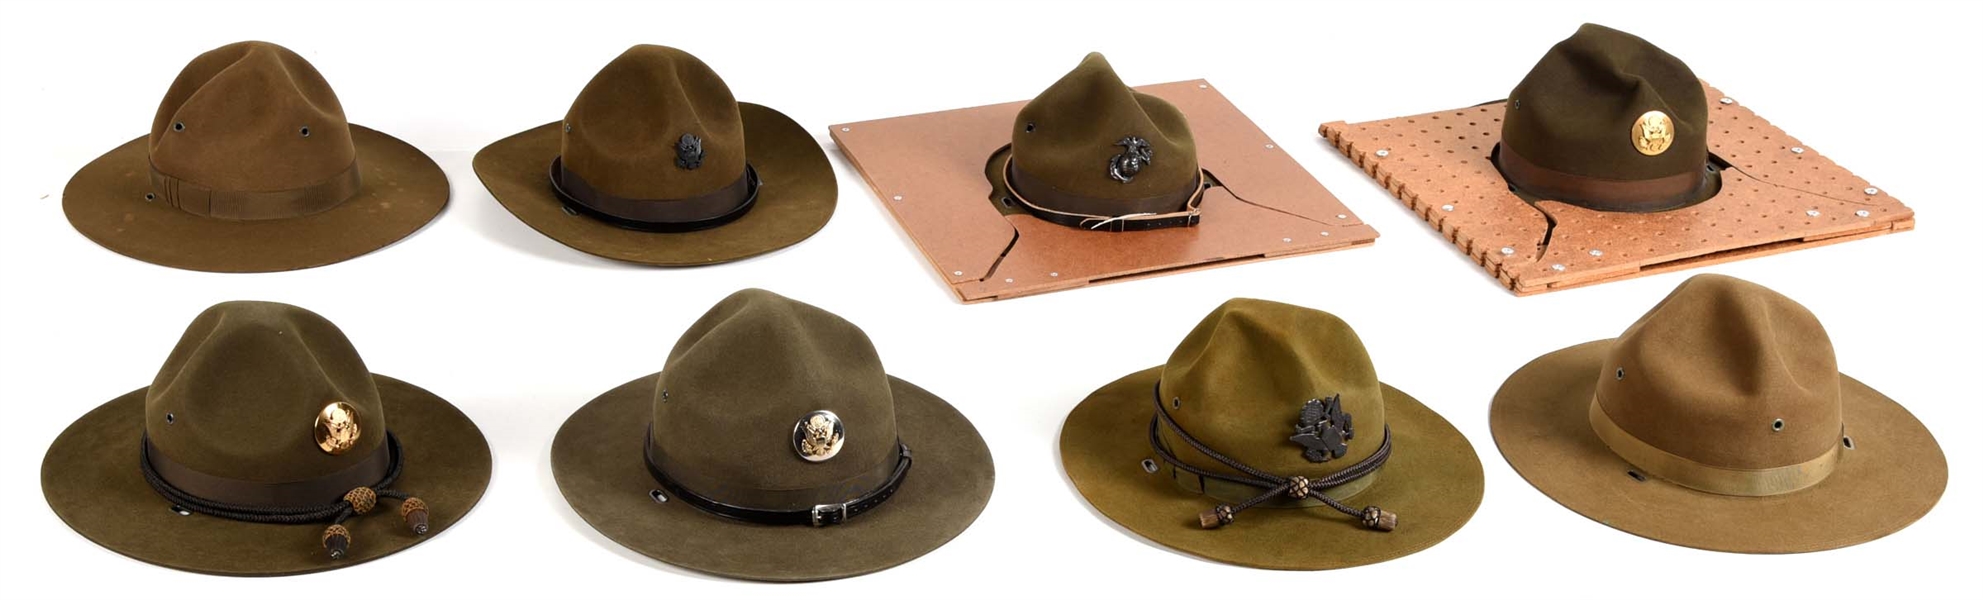 LOT OF US ARMY AND MARINE CORPS CAMPAIGN AND DRILL INSTRUCTOR HATS.